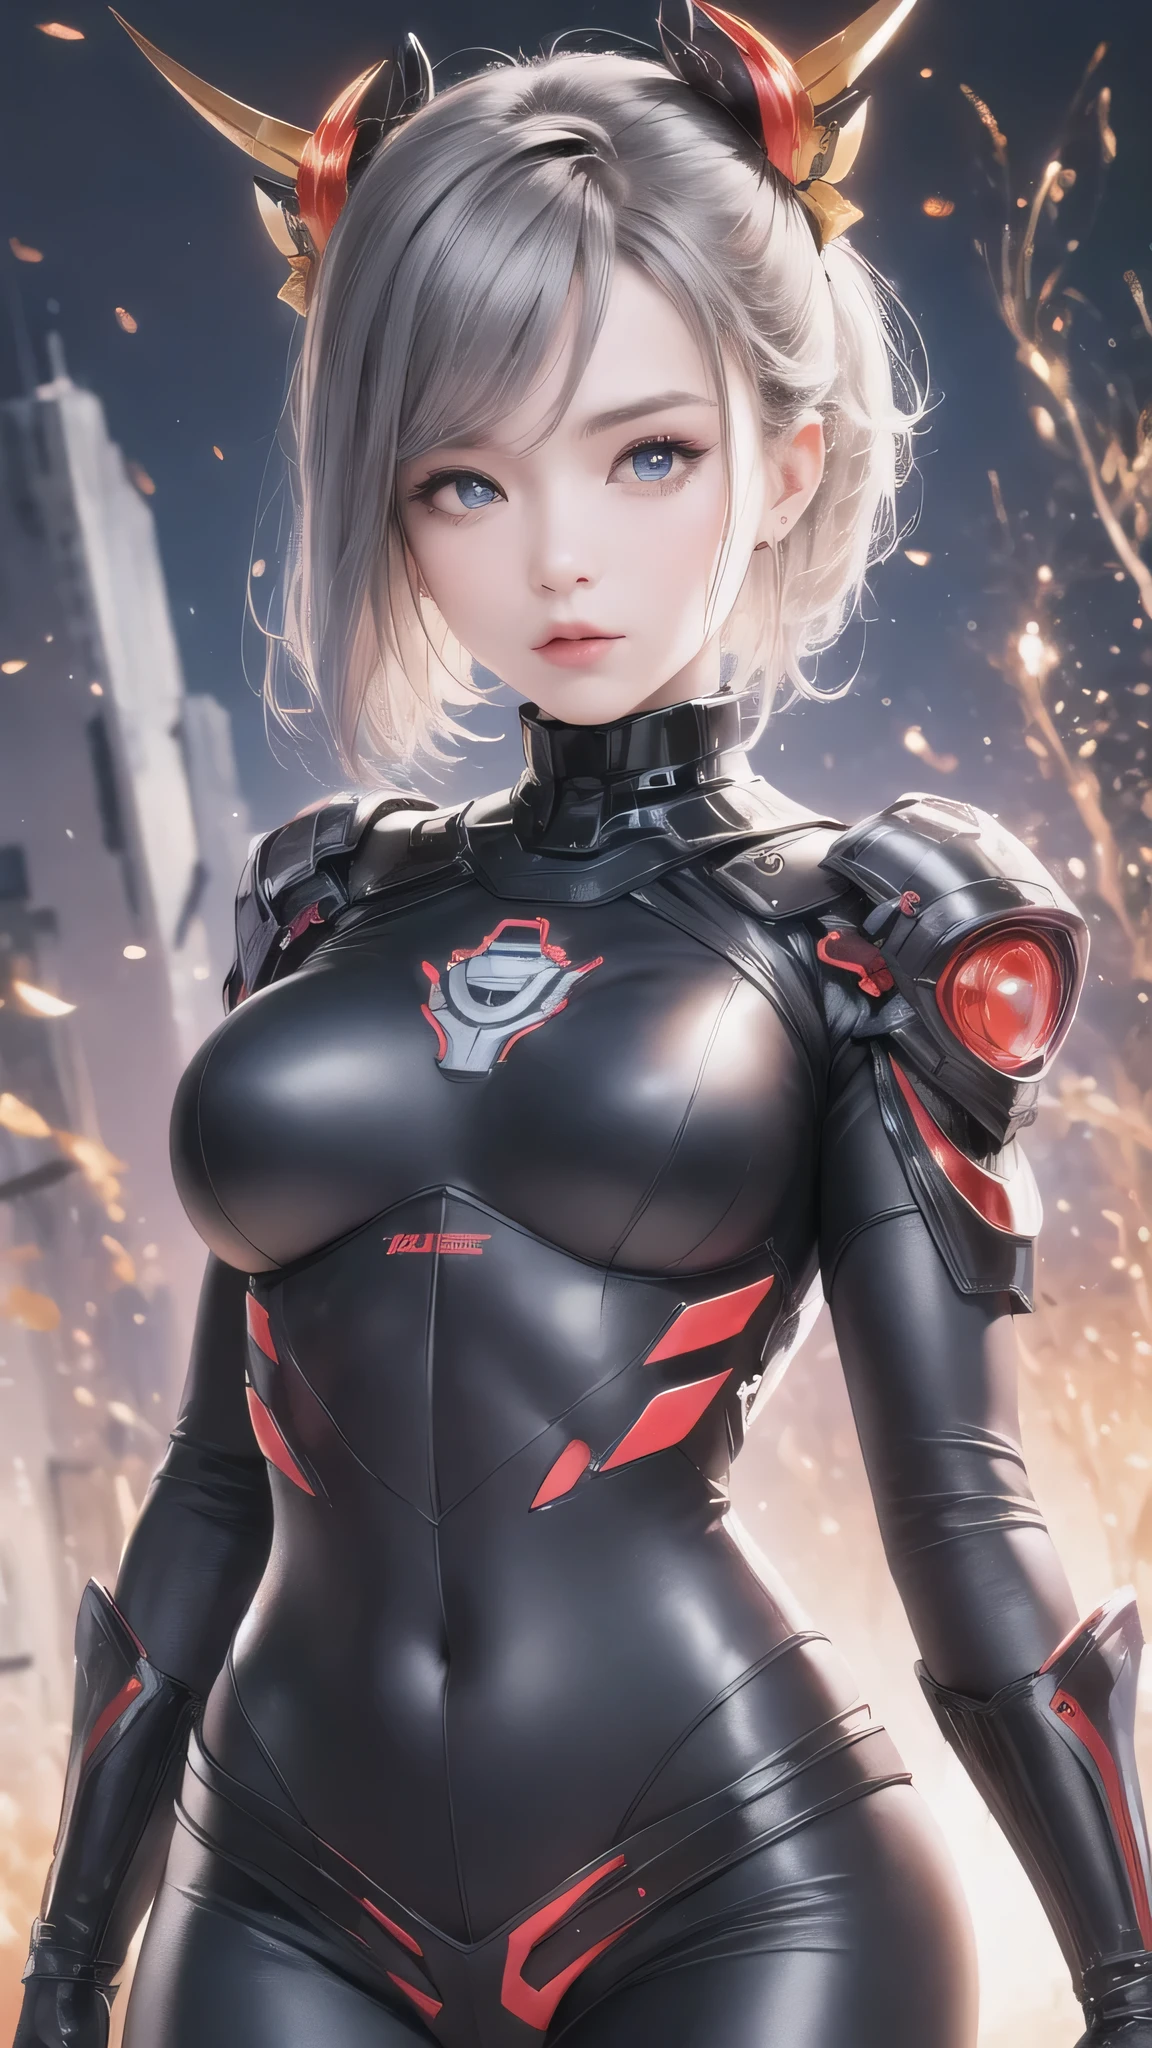 (Close-up:1.4)、(RAW photo:1.2)、(photorealistic:1.4)、(masterpiece:1.3)、(highest quality:1.4)、(Beautiful woman with perfect body:1.4)、A woman stands in front of a group of robots、beautiful android woman、beautiful female soldier、girl in a suit、complex combat uniform、beautiful young Japanese woman、Highly detailed face and skin texture、detailed big eyes、double eyelid、cute face、(short bob:1.2)、(huge breasts)、(full body shot)、cowboy shot、(angry expression:1.2)、Storm and epic war scene、cyberpunk scene、night time、illumination、plug suit、combat uniform damage、